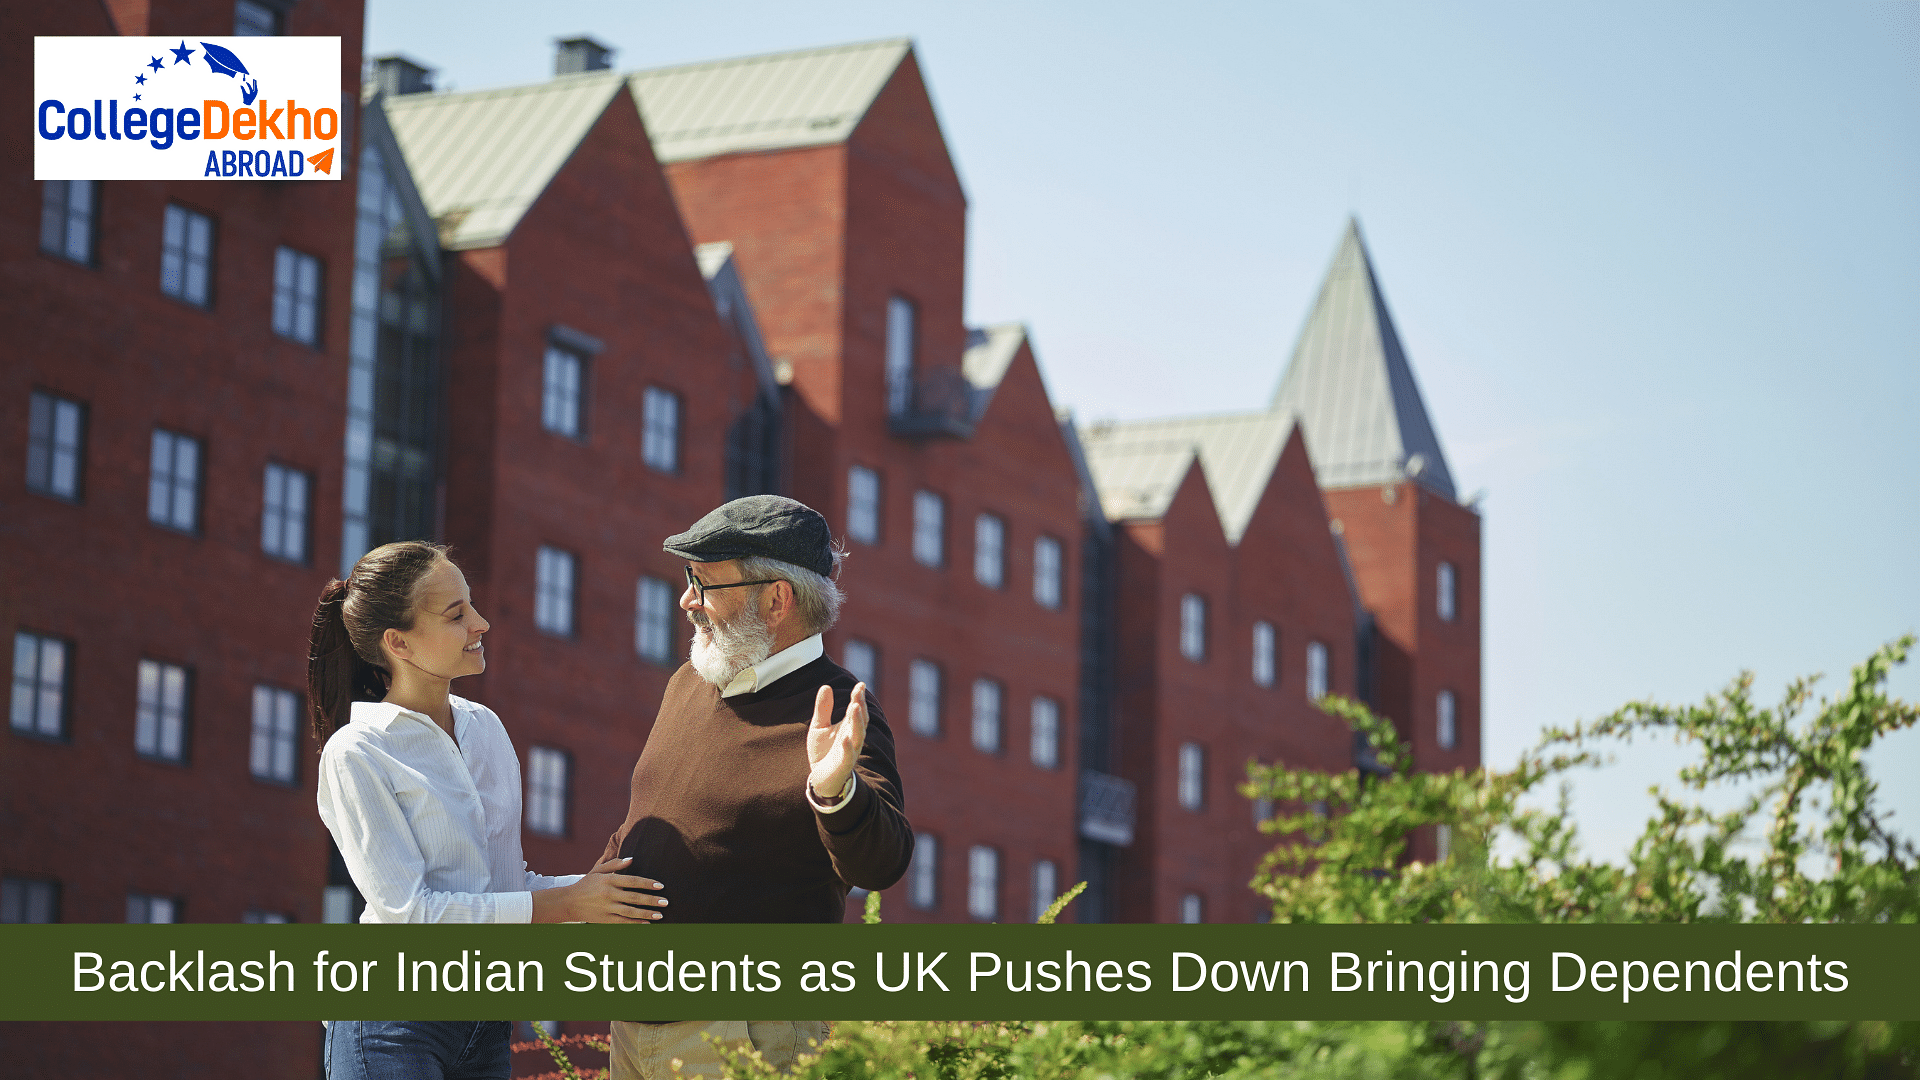 Backlash for Indian Students as UK Pushes Down Bringing Dependents